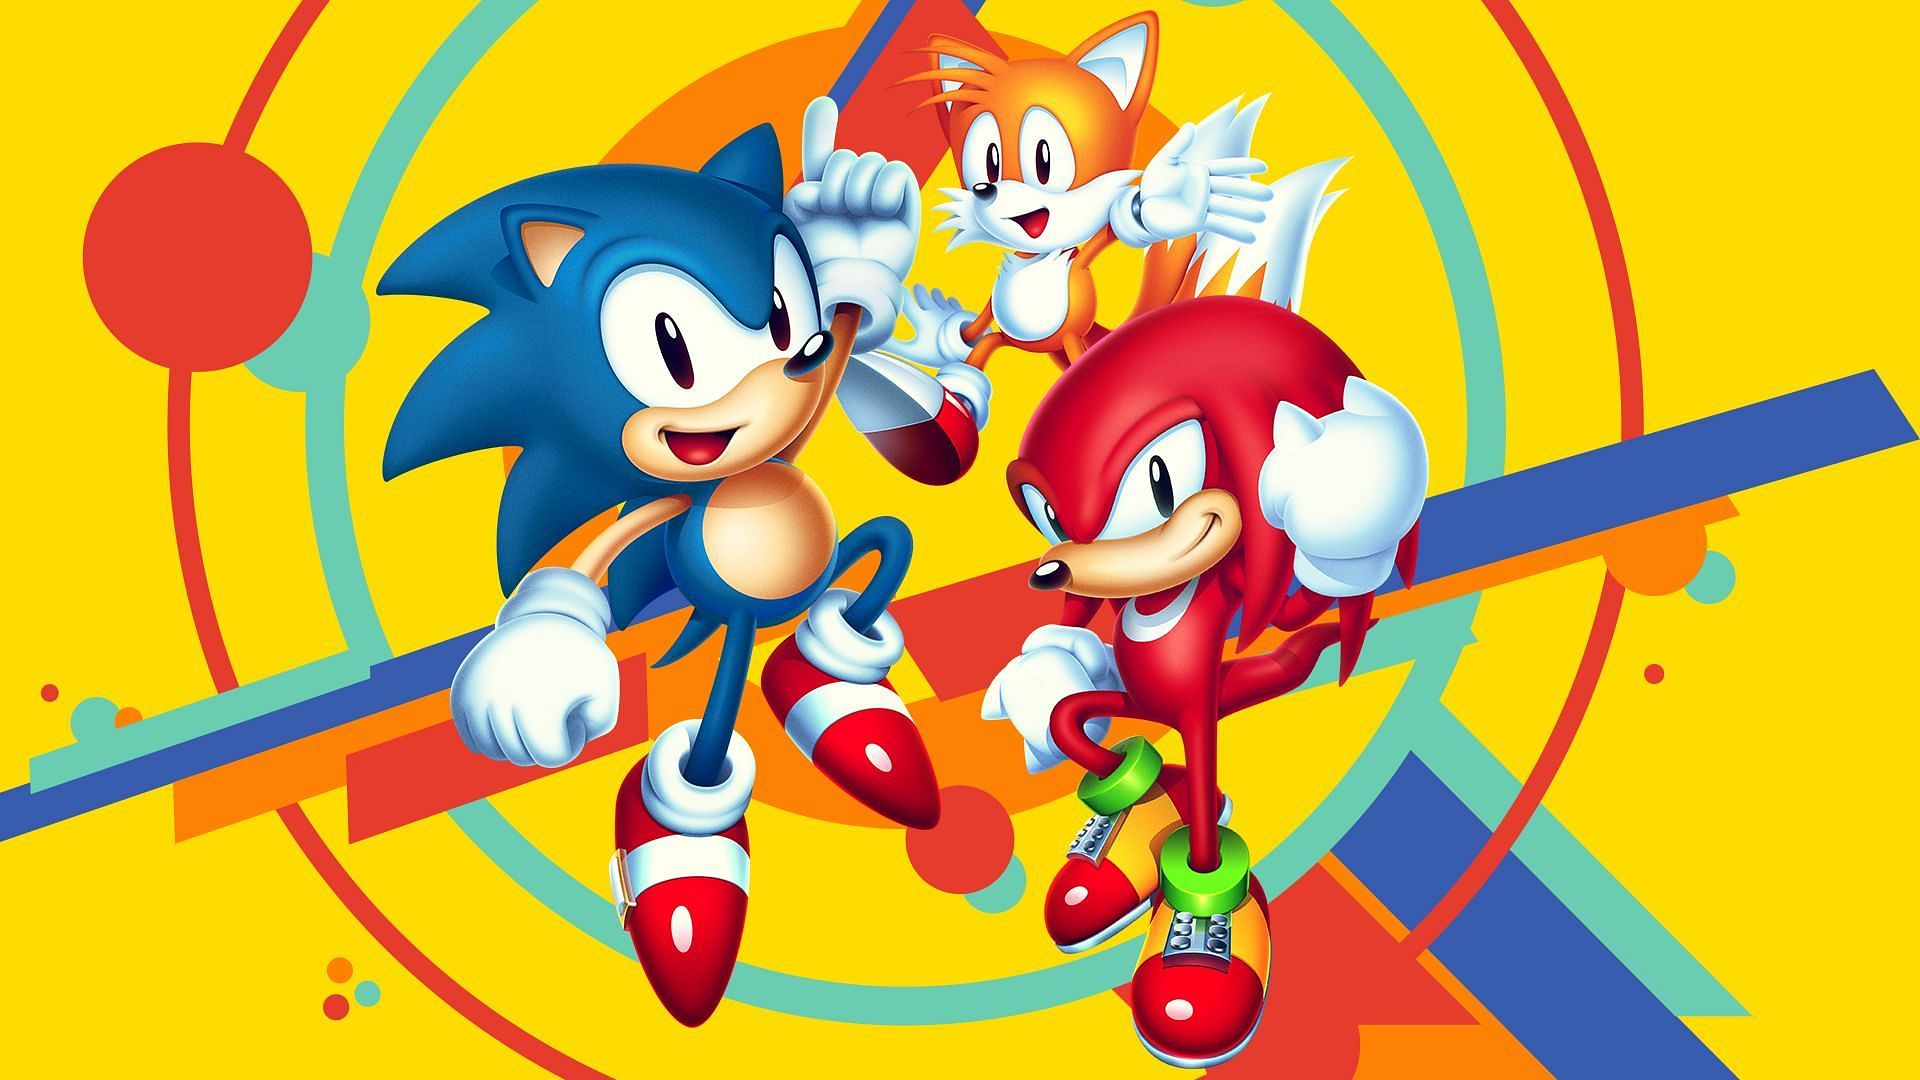 Collect rings, explore the sonice realm with knuckles and others and defeat Eggman (Image via Christian WhiteHead)